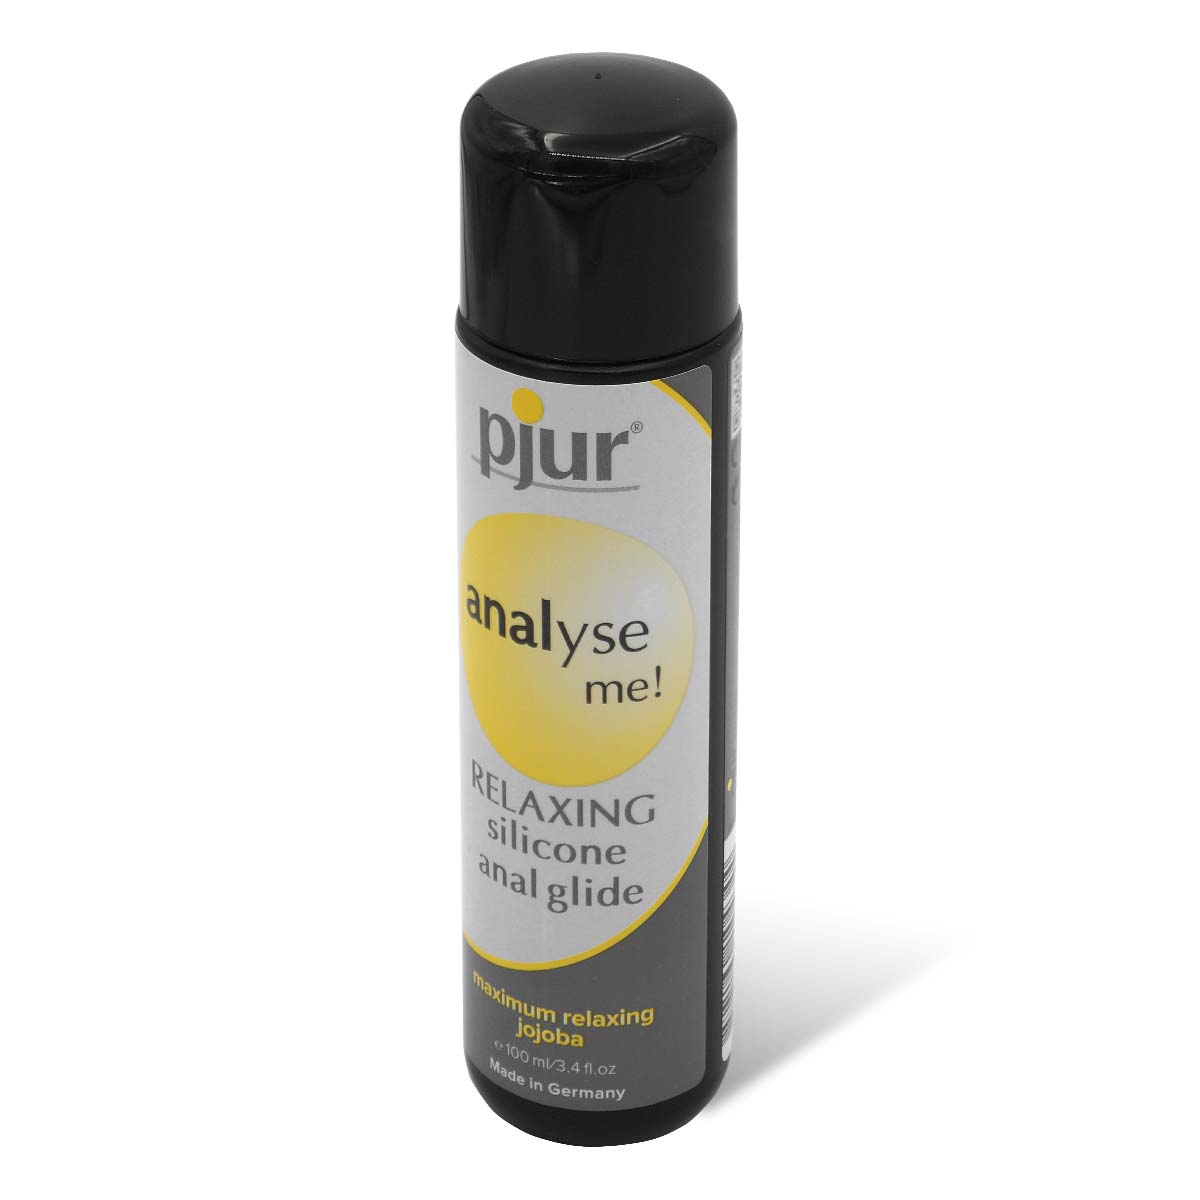 pjur analyse me! RELAXING Silicone Anal Glide 100ml Silicone-based Lubricant-thumb_1